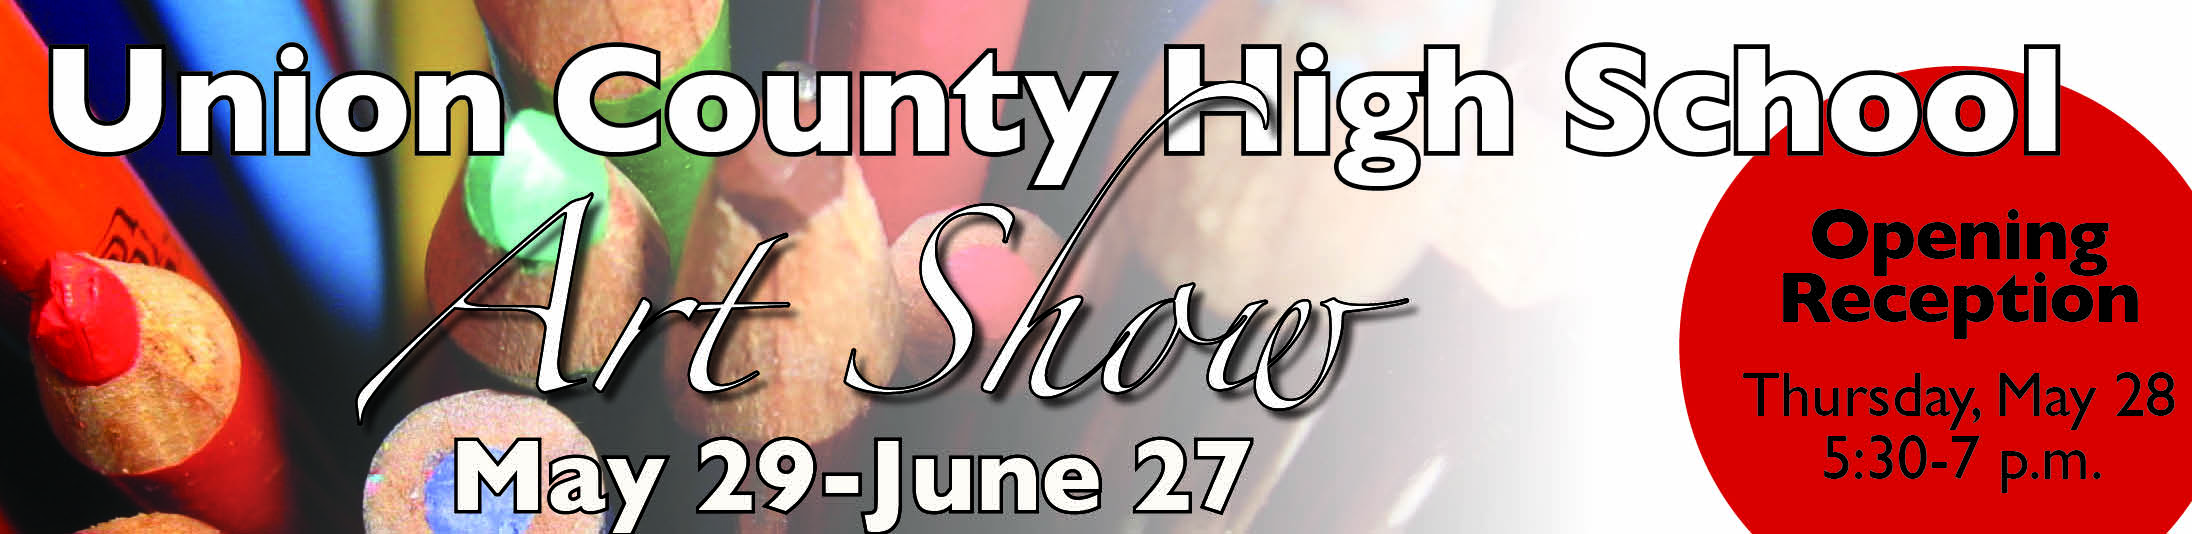 Union County High School Art Exhibition, May 29 through June 27, 2015. Opening reception Thursday May 28.